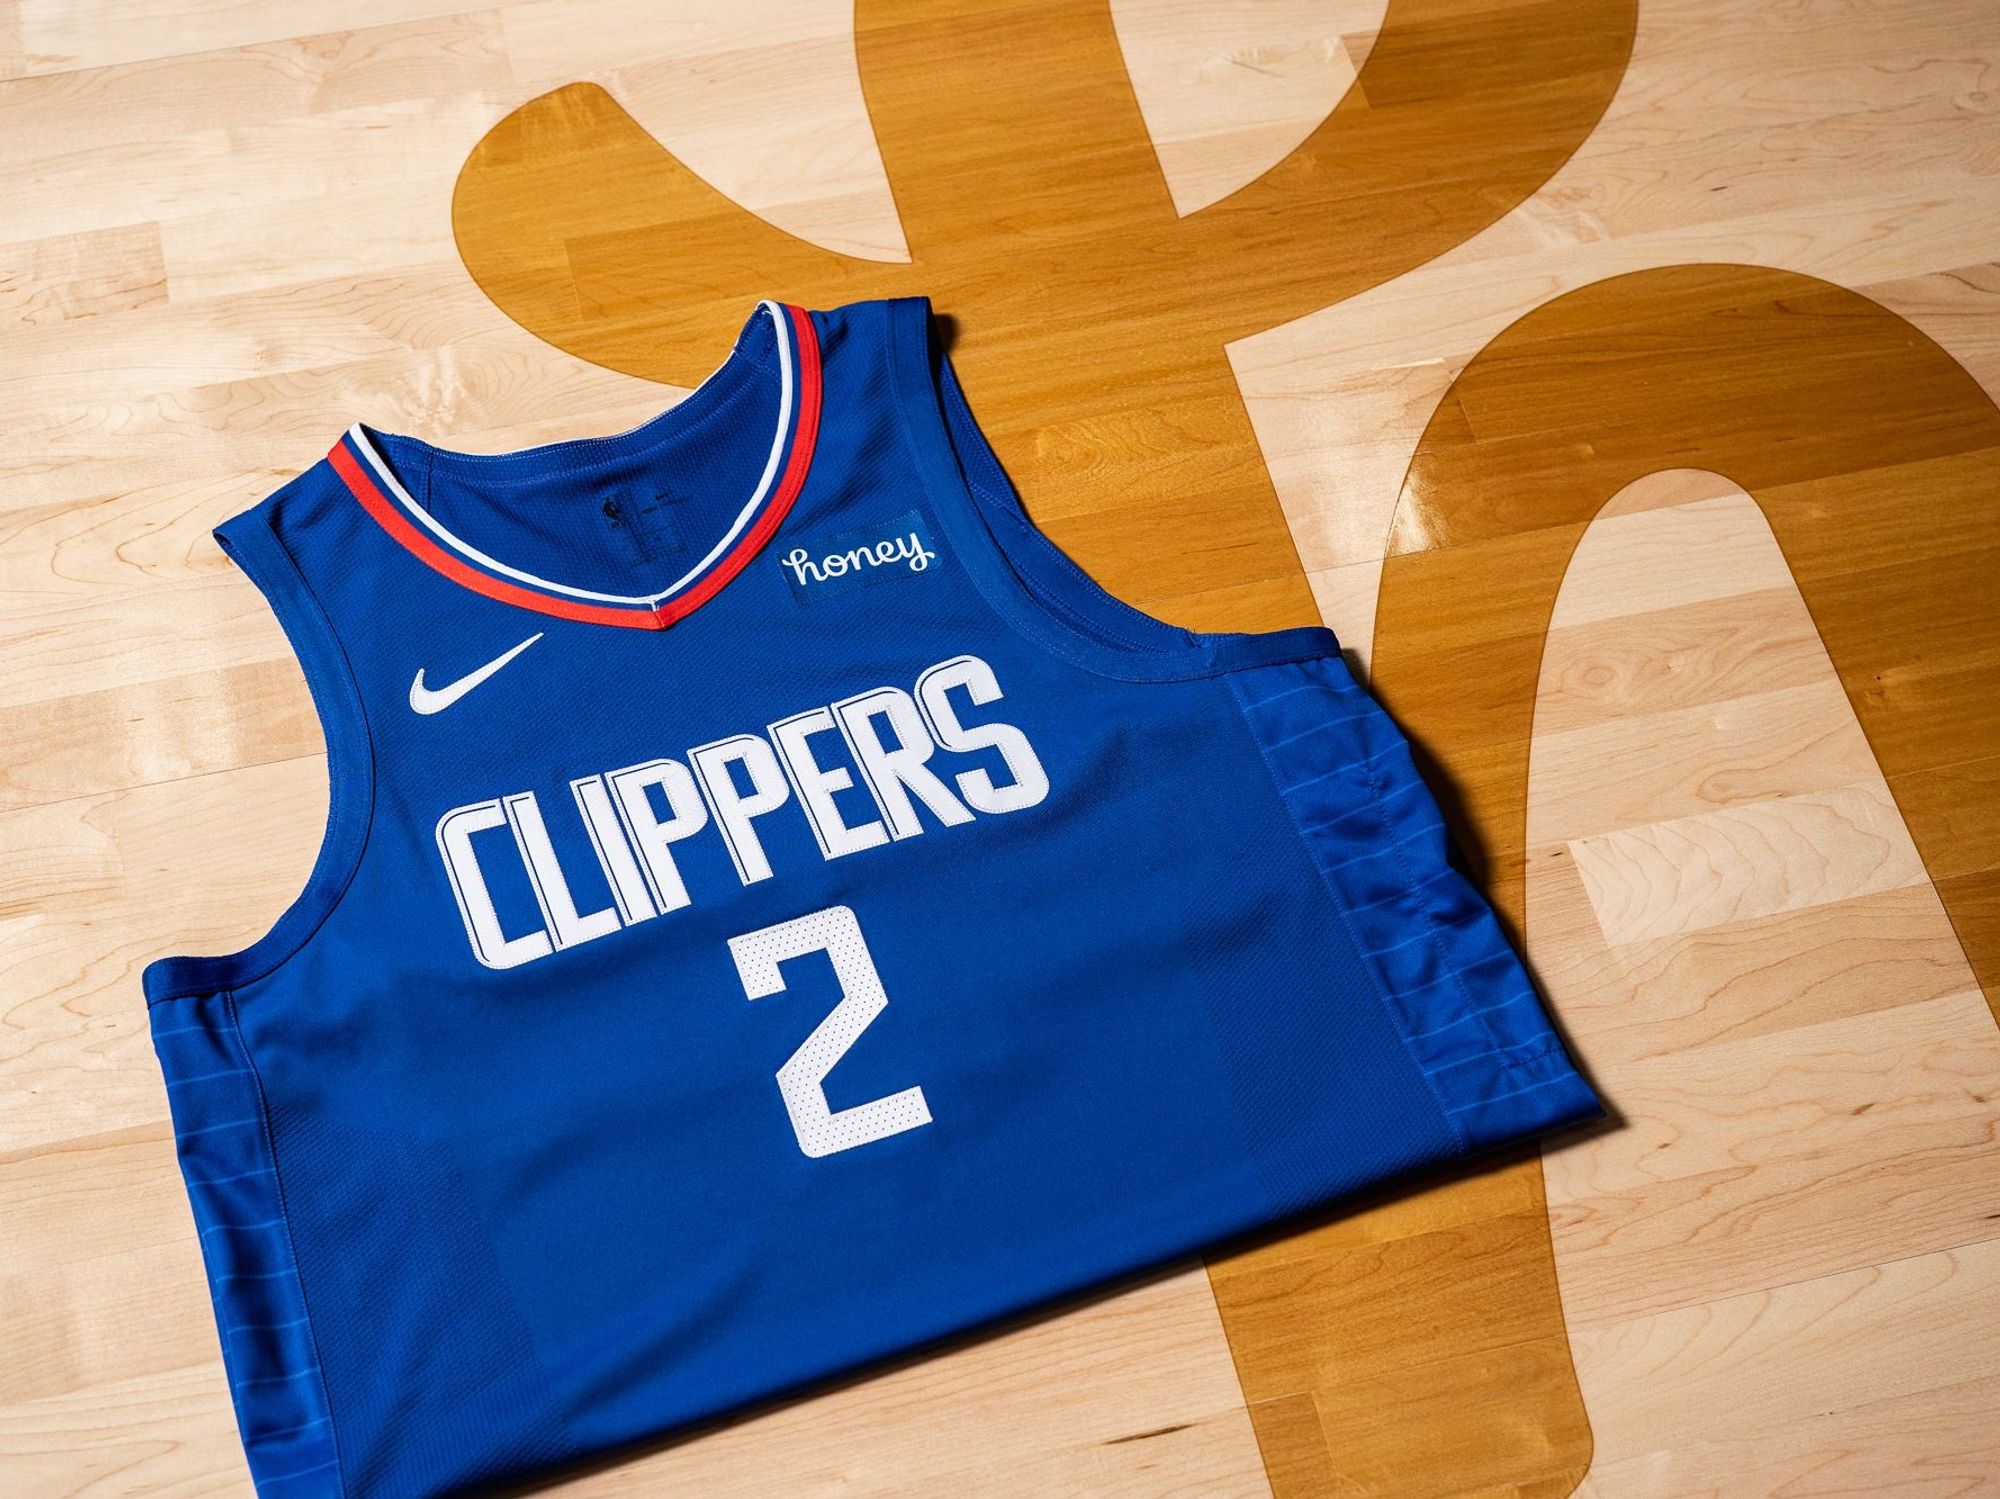 Honey Clippers jersey